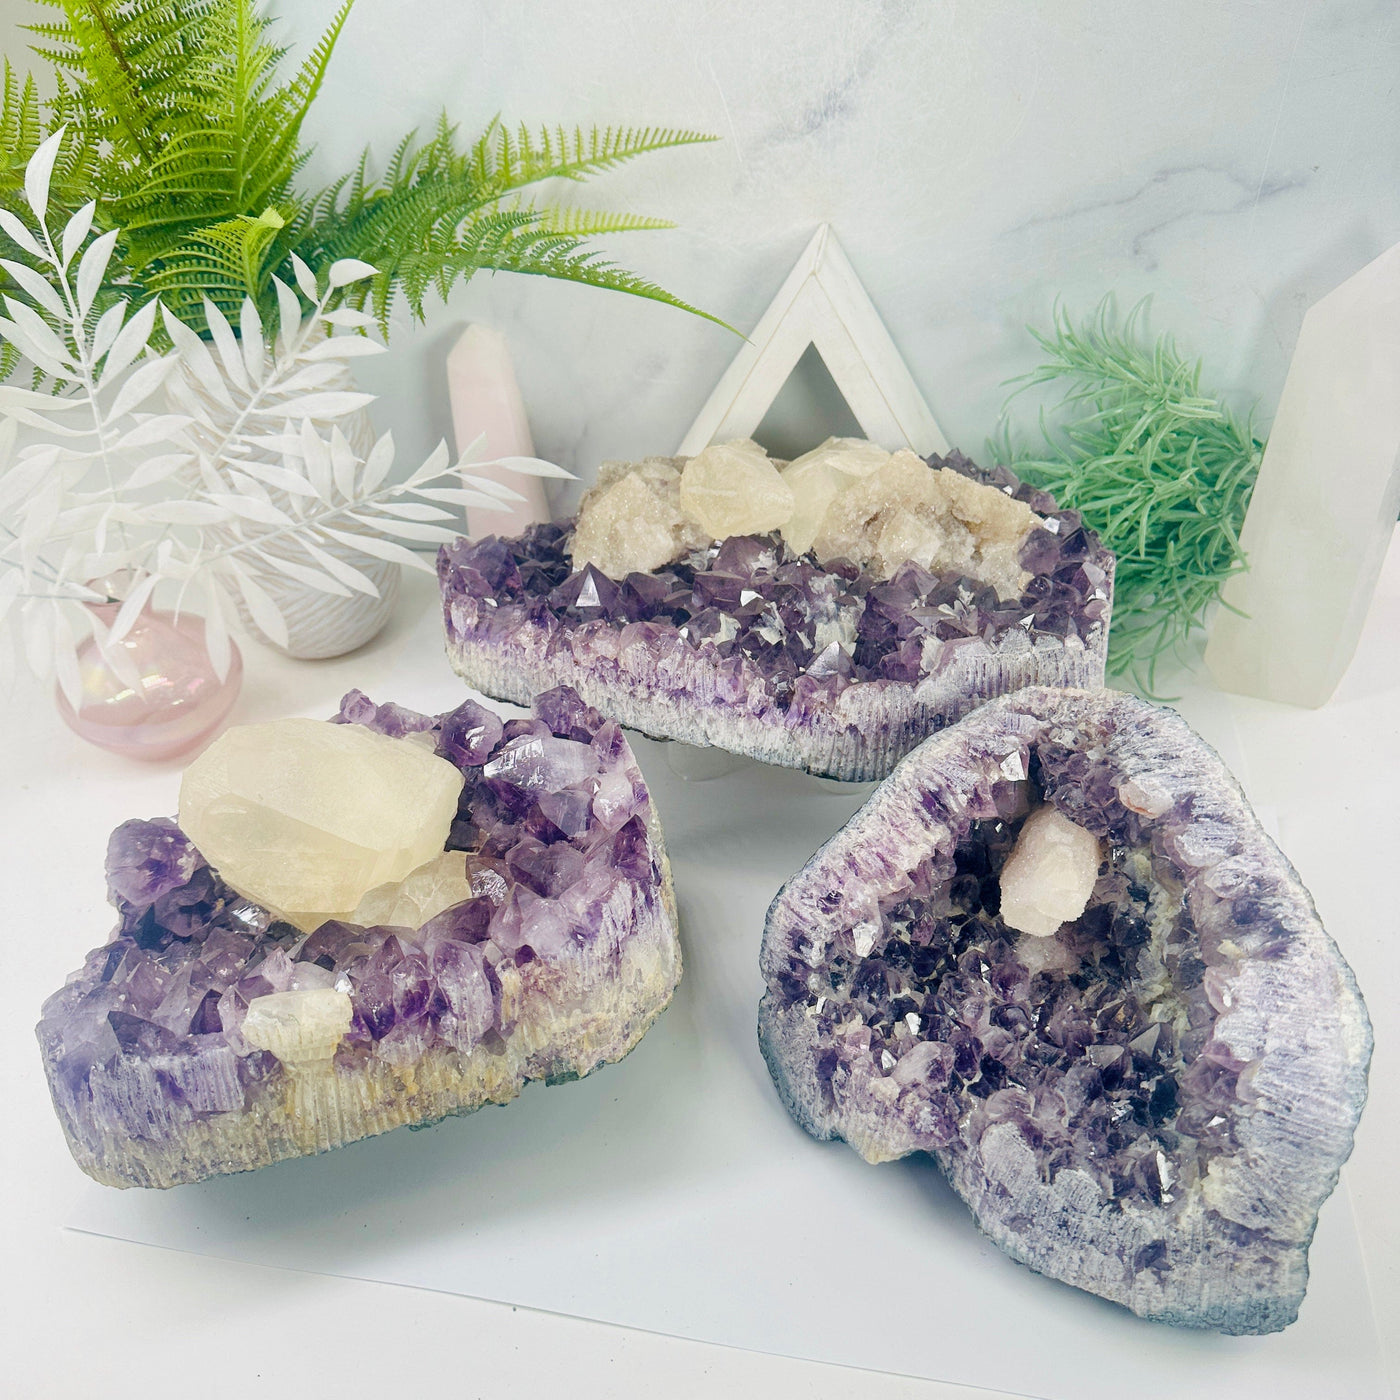 Amethyst Cluster with Crystal Quartz - Large High Quality Amethyst - You Choose all variants